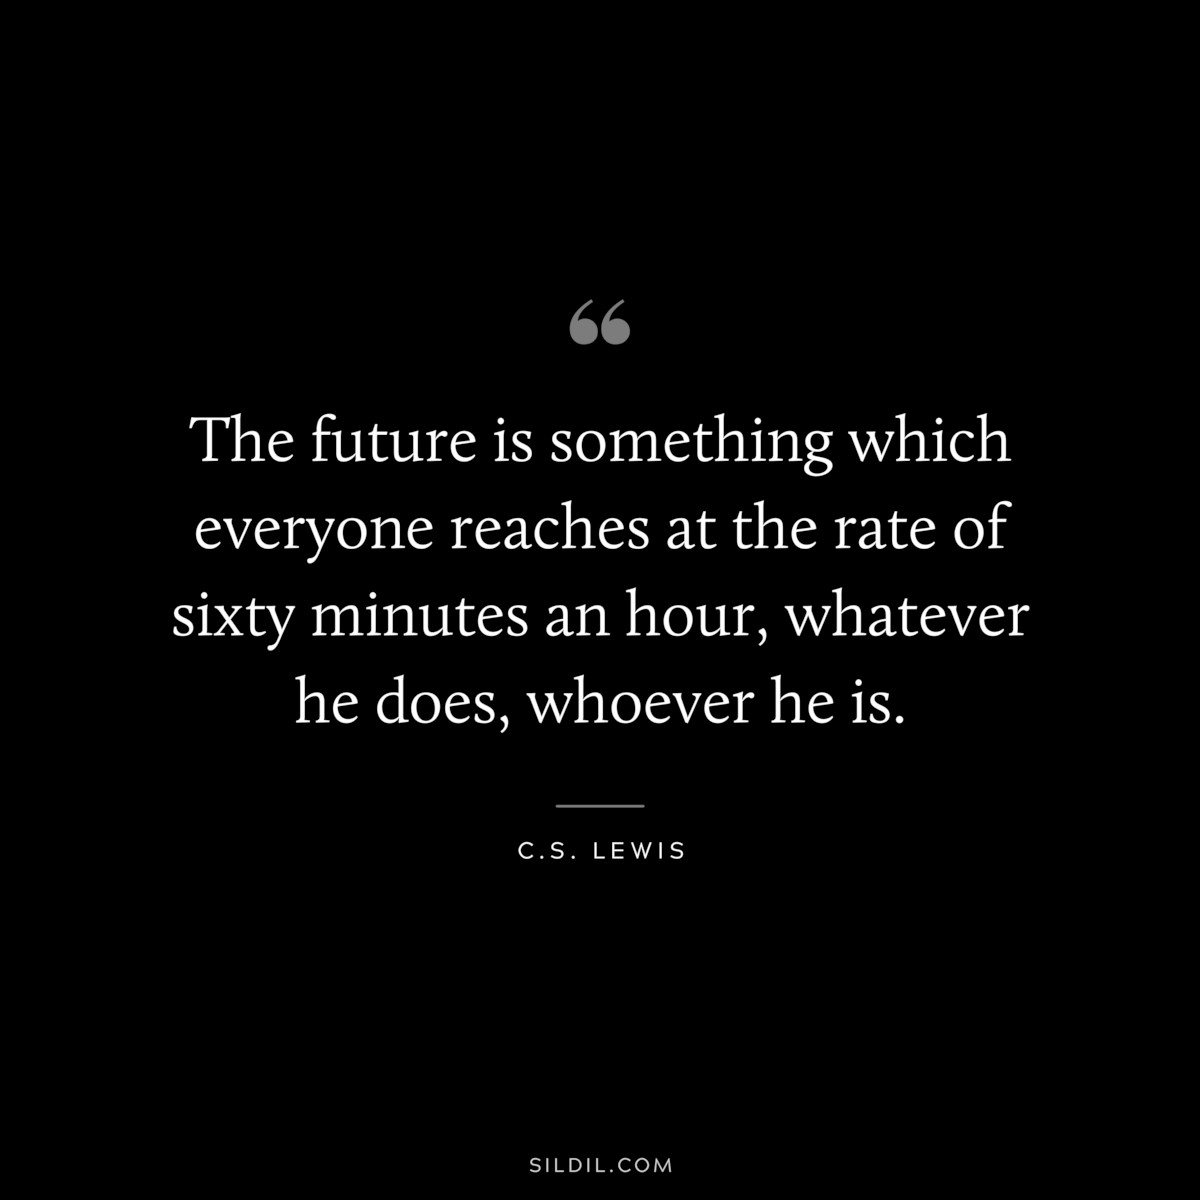 The future is something which everyone reaches at the rate of sixty minutes an hour, whatever he does, whoever he is. ― C.S. Lewis